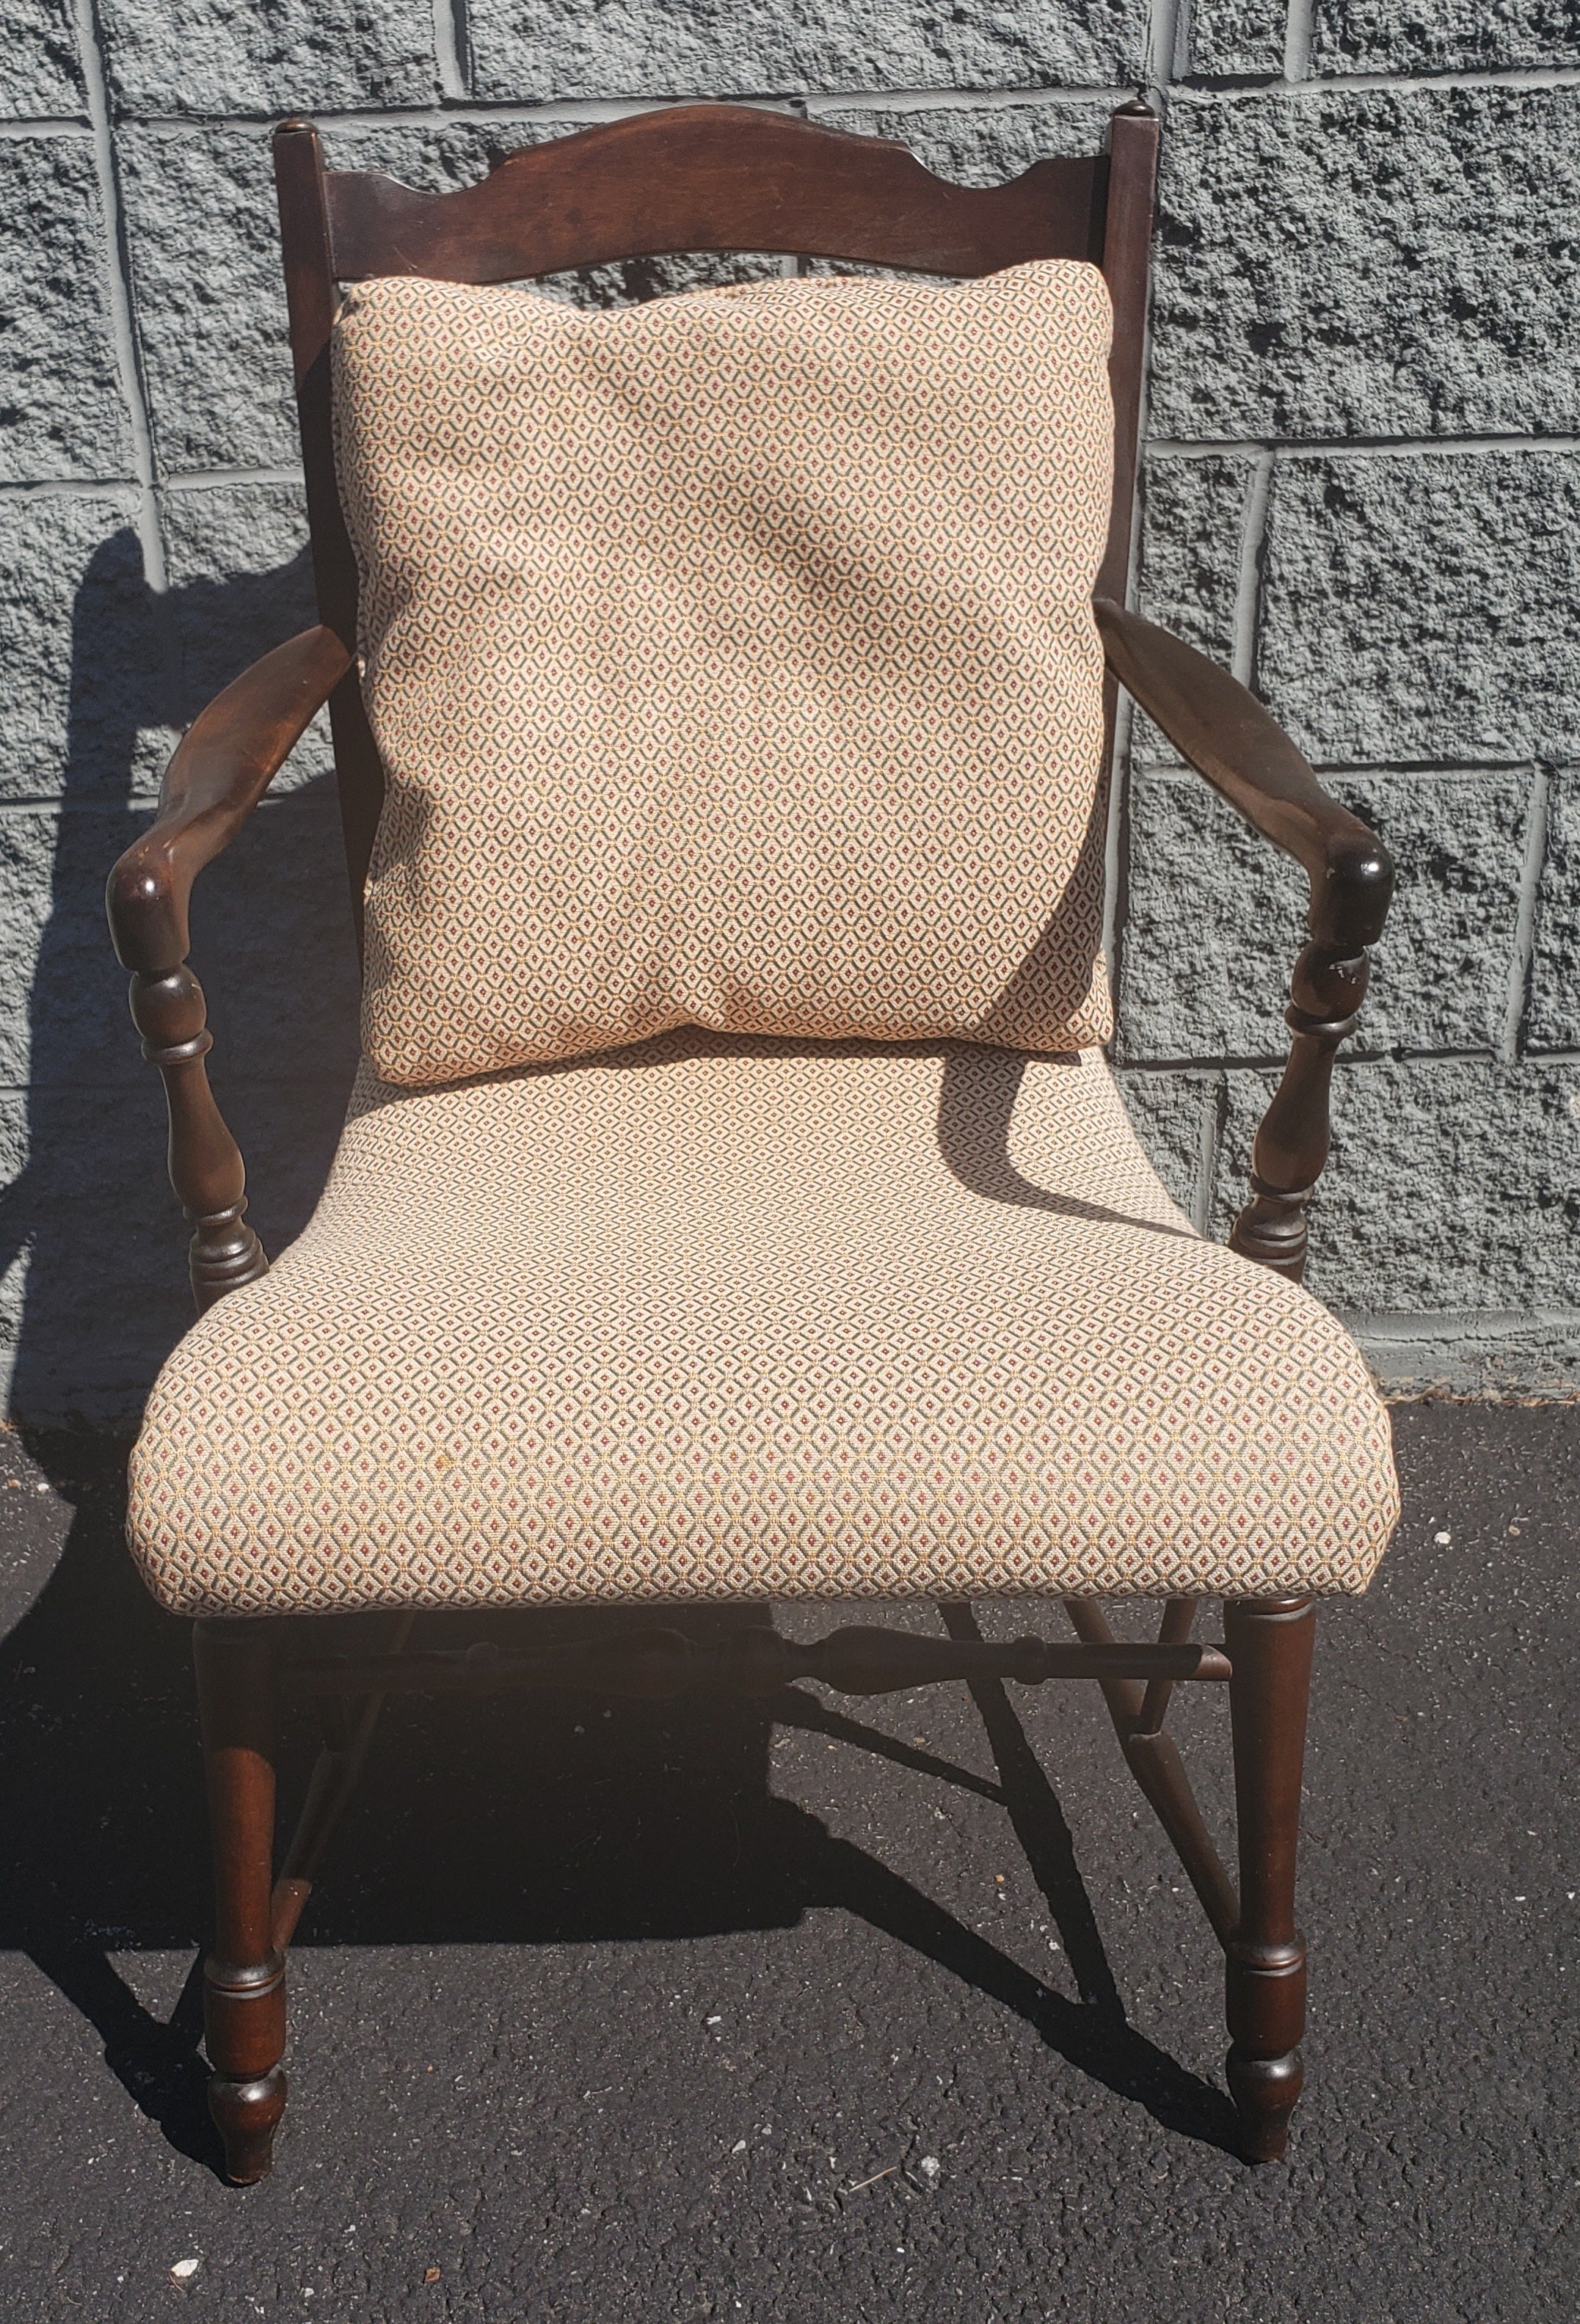 American Exquisite Antique Mahogany Elongated Seat Upholstered Armchair, Circa 1920s For Sale